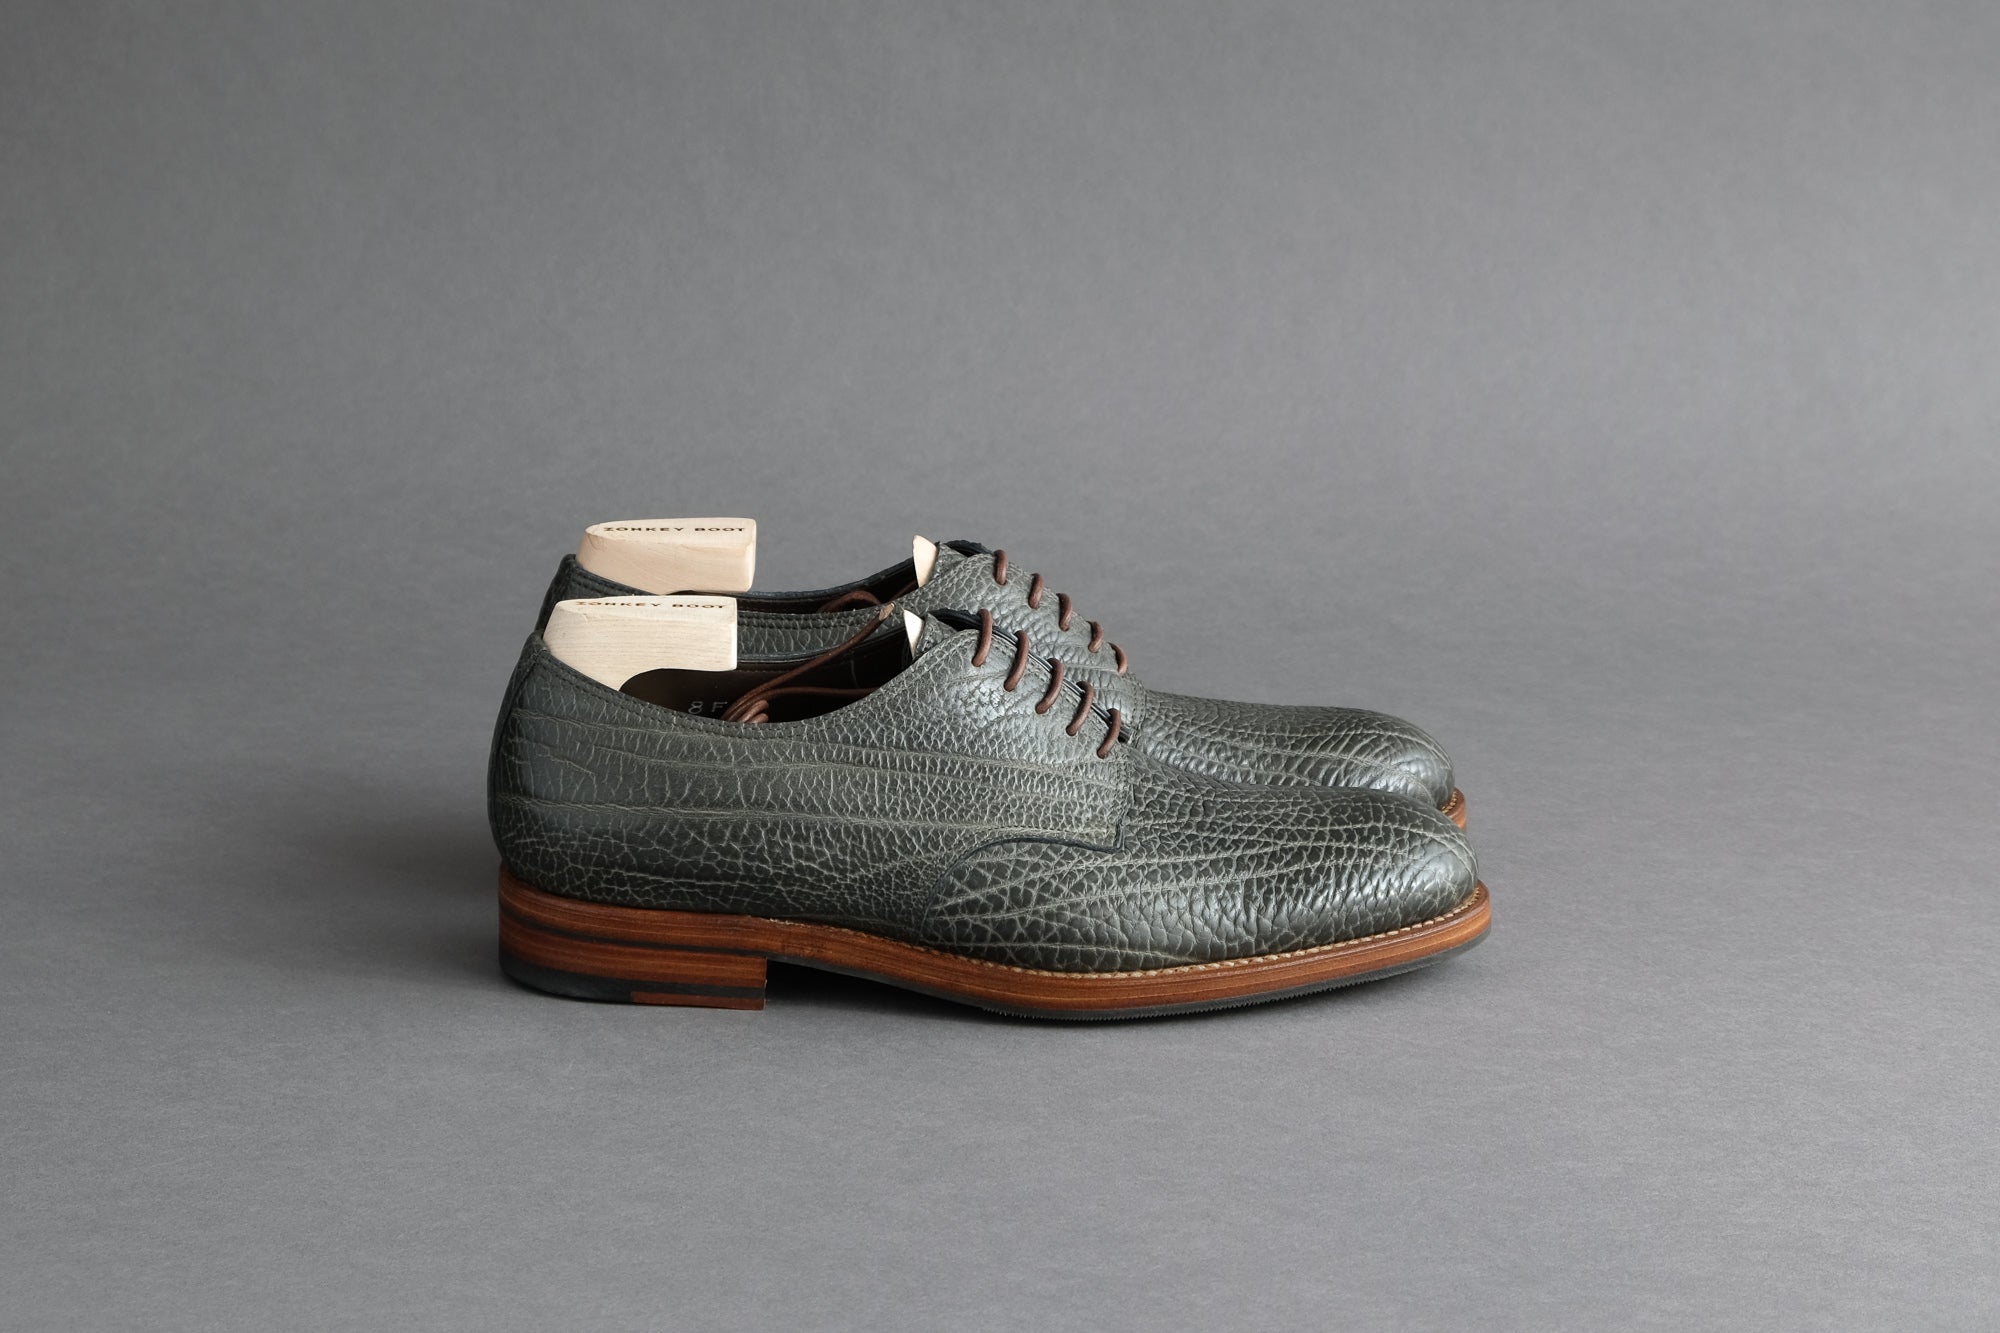 Zonkey Boot hand welted derby shoes from Olive Green Shrunken Bull leather